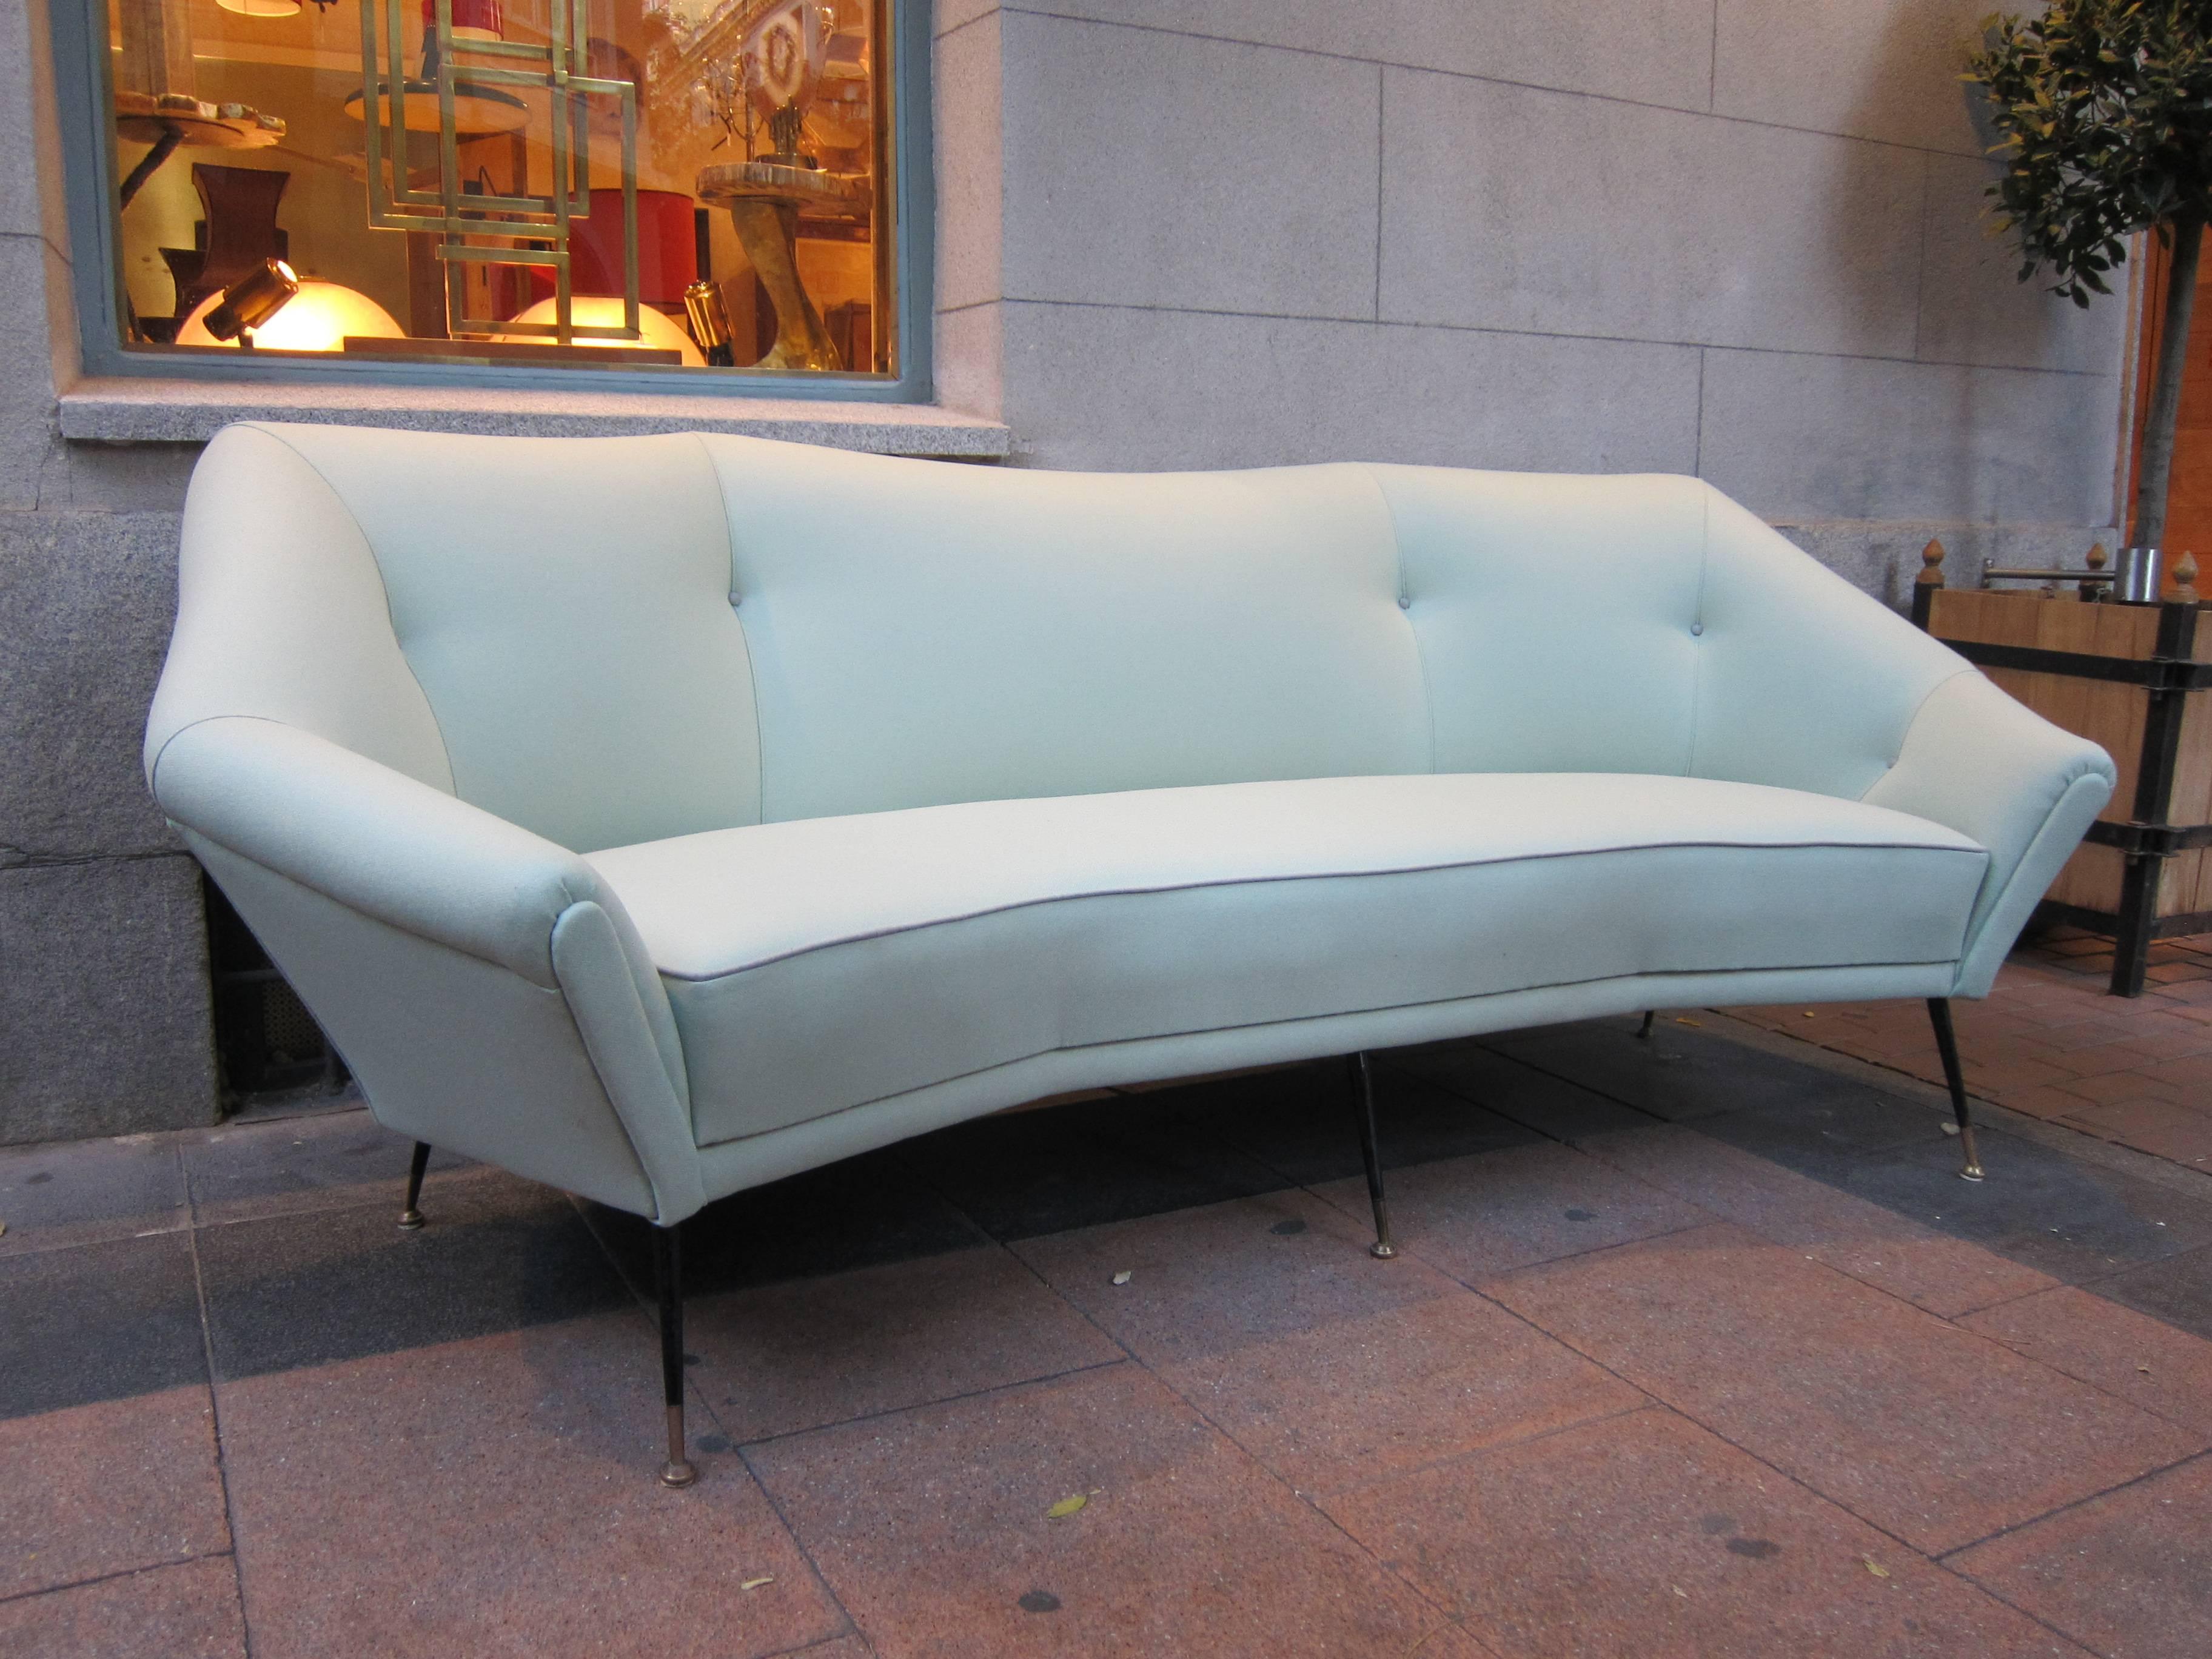 Gigi Radice Lacquered Metal and Brass Curved Sofa, Wool Upholstery, Italy, 1960 In Excellent Condition For Sale In Madrid, ES